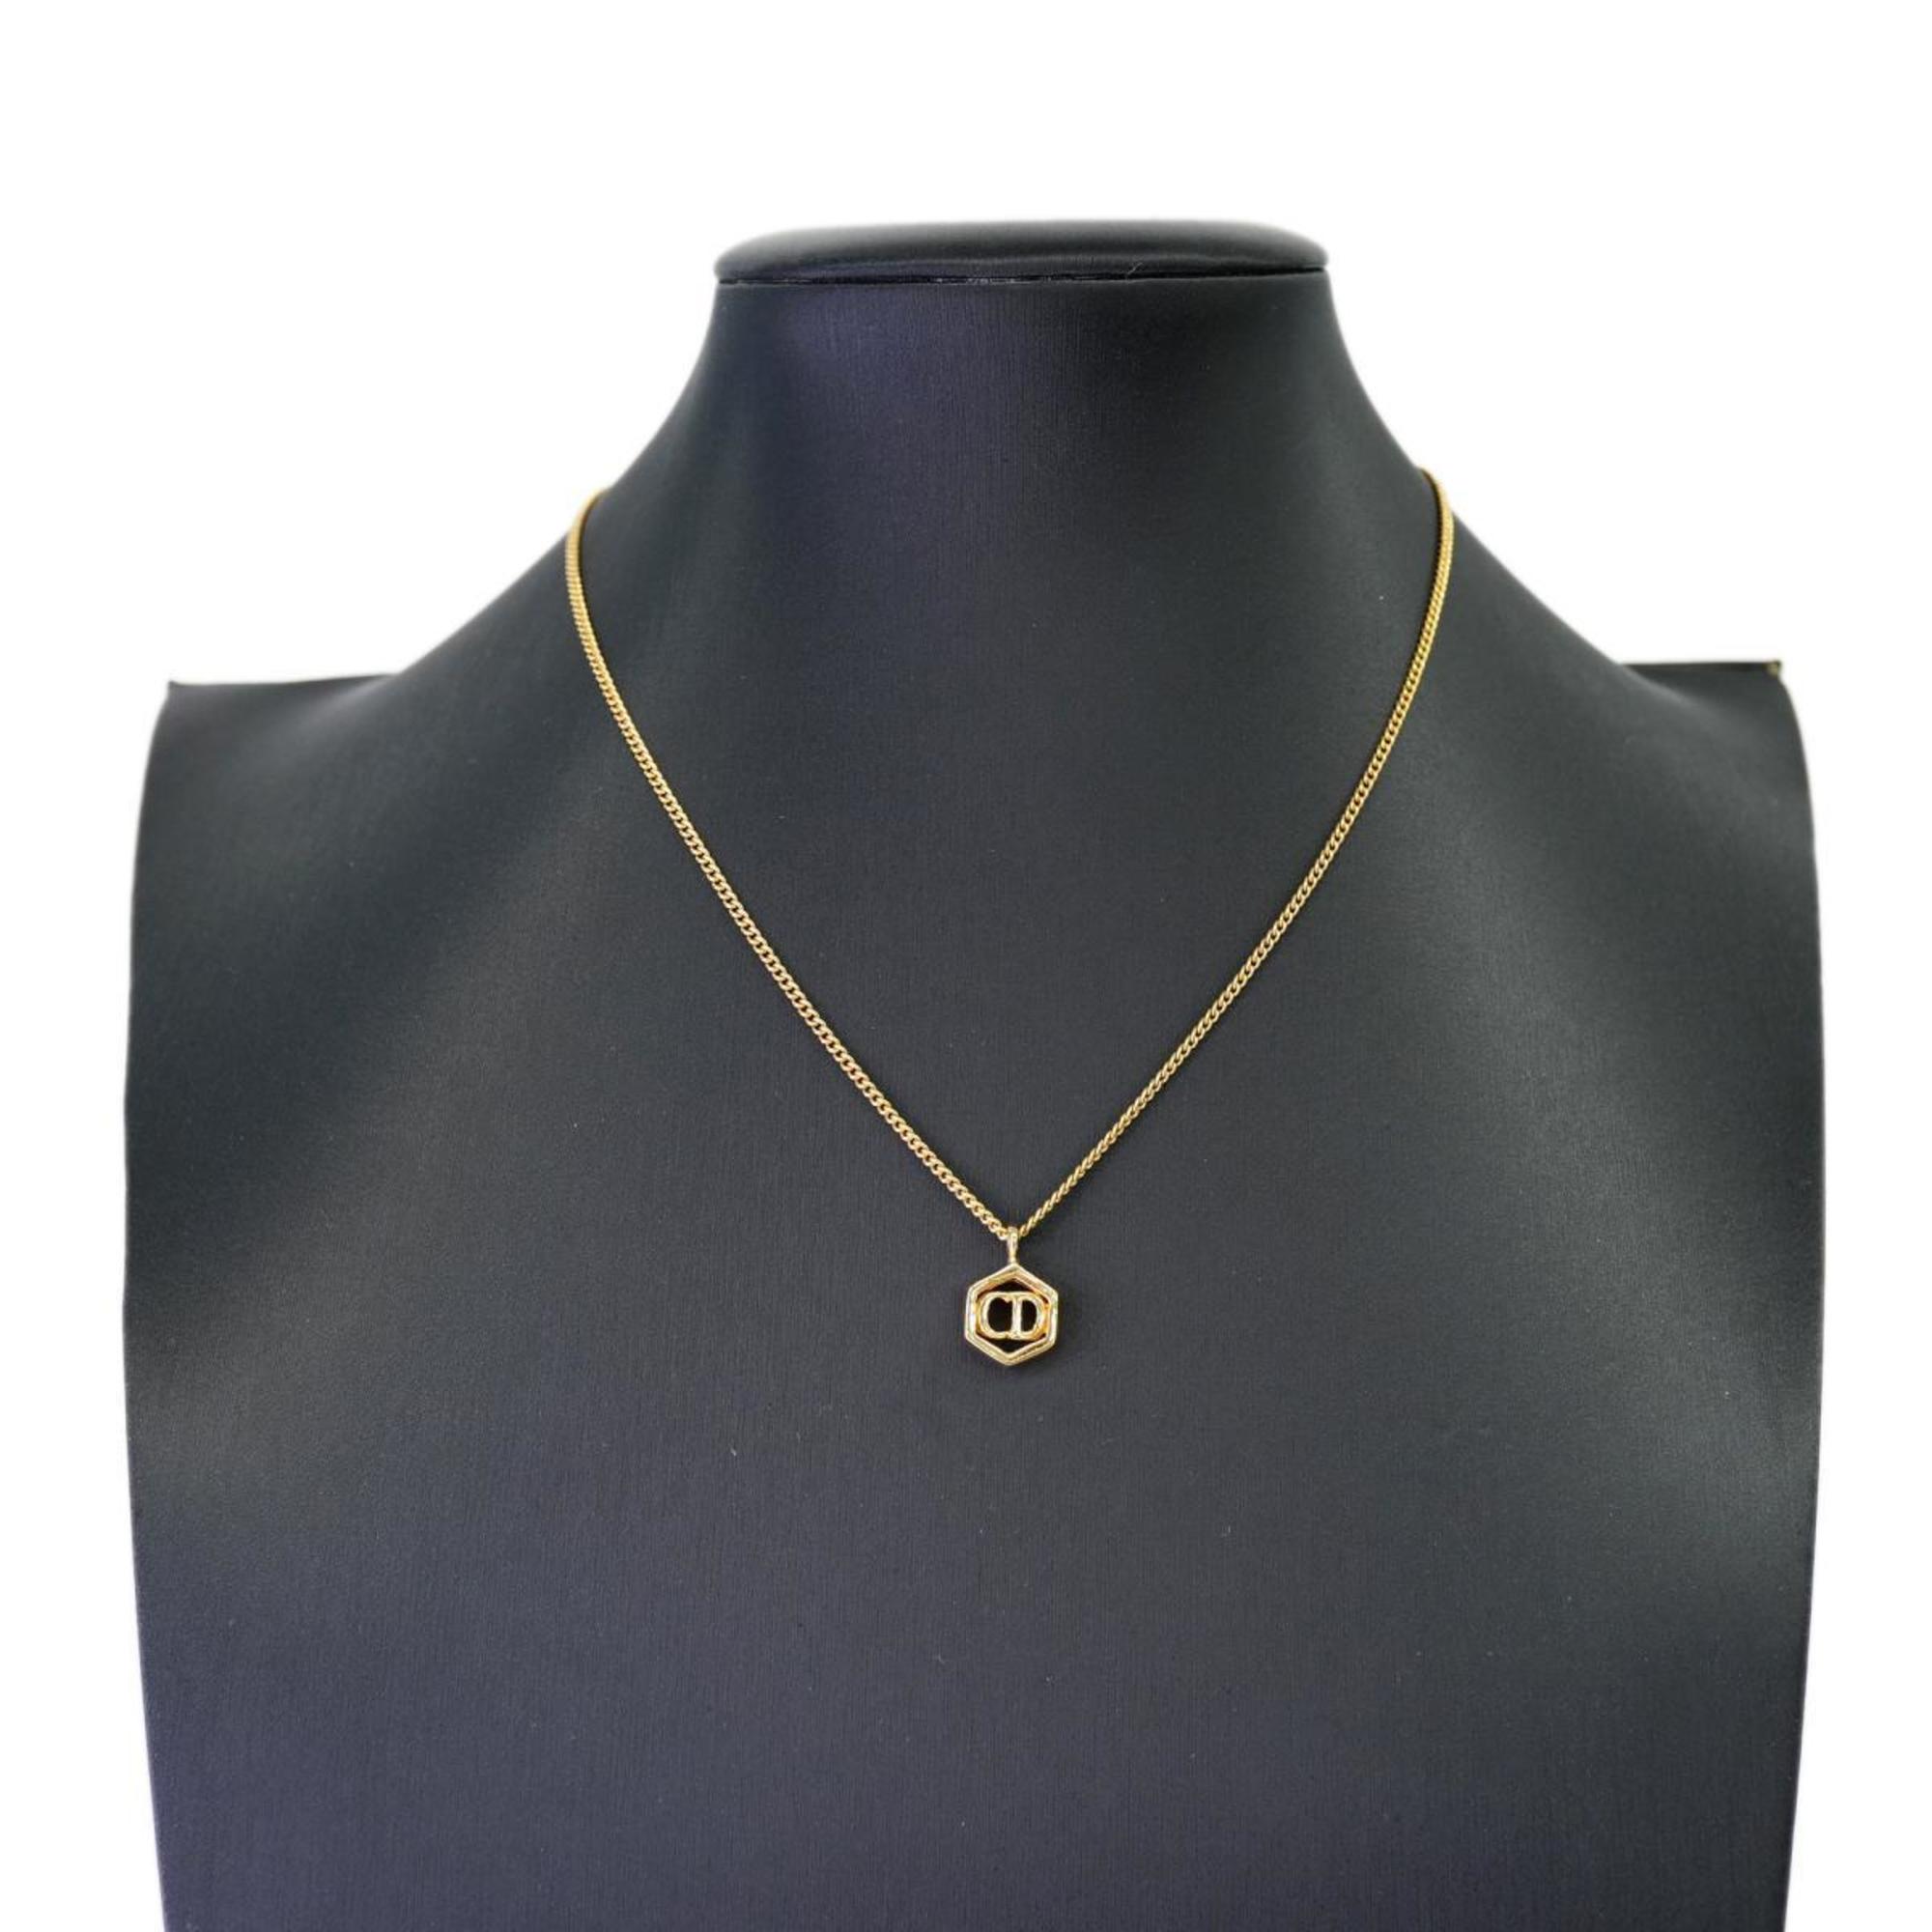 Christian Dior Necklace CD GP Plated Gold Women's